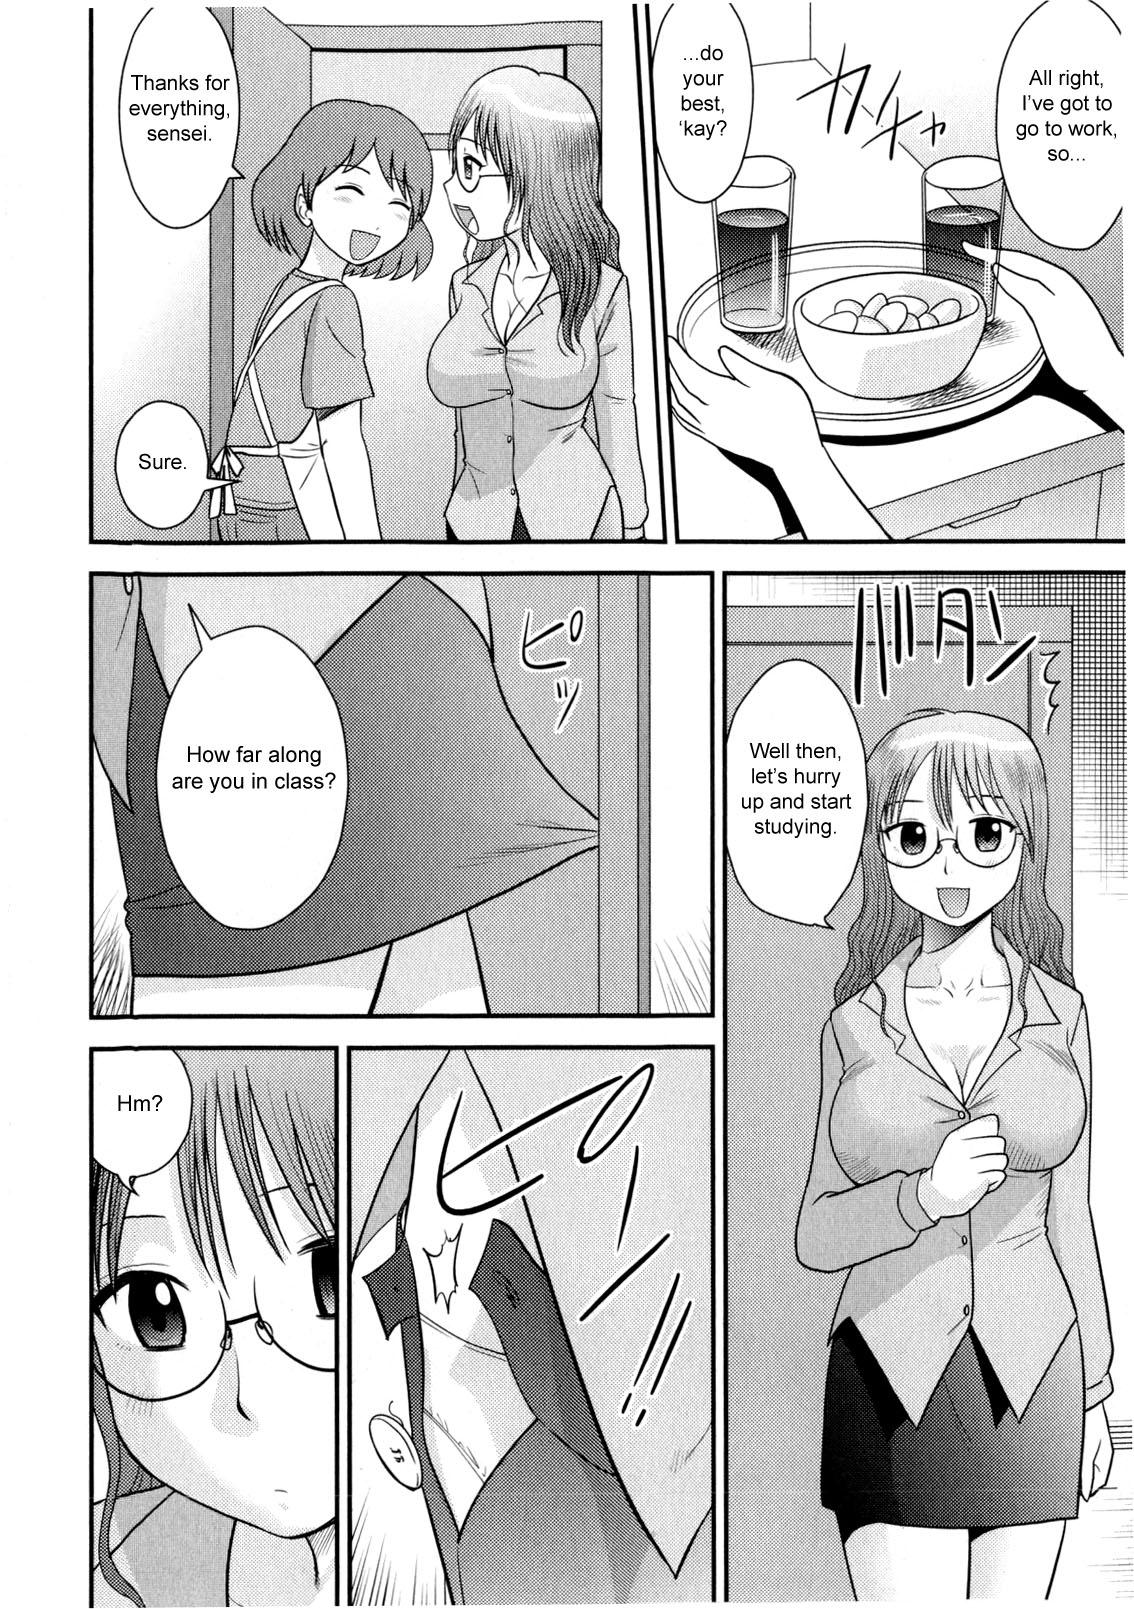 Close Back to the Teacher Emo - Page 2